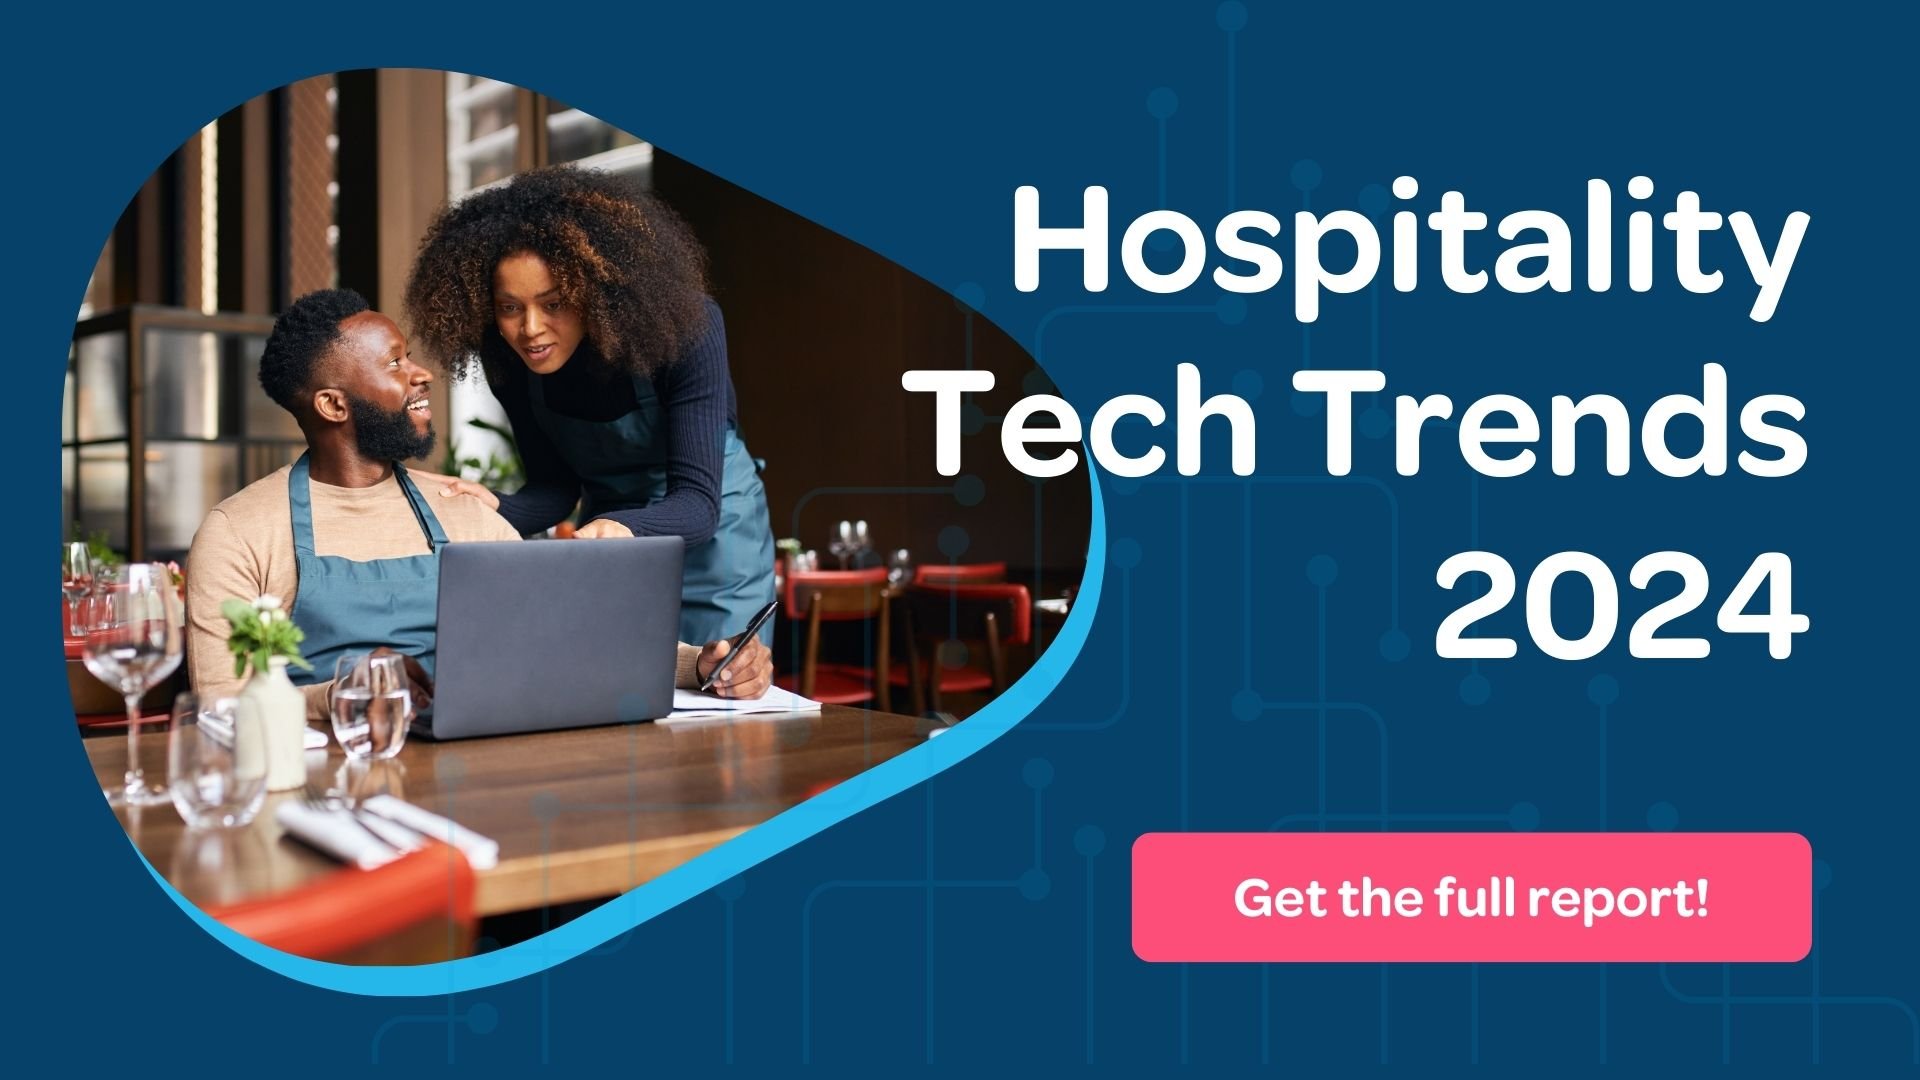 CTA to download ResDiary's Hospitality Tech Trends  2024 report